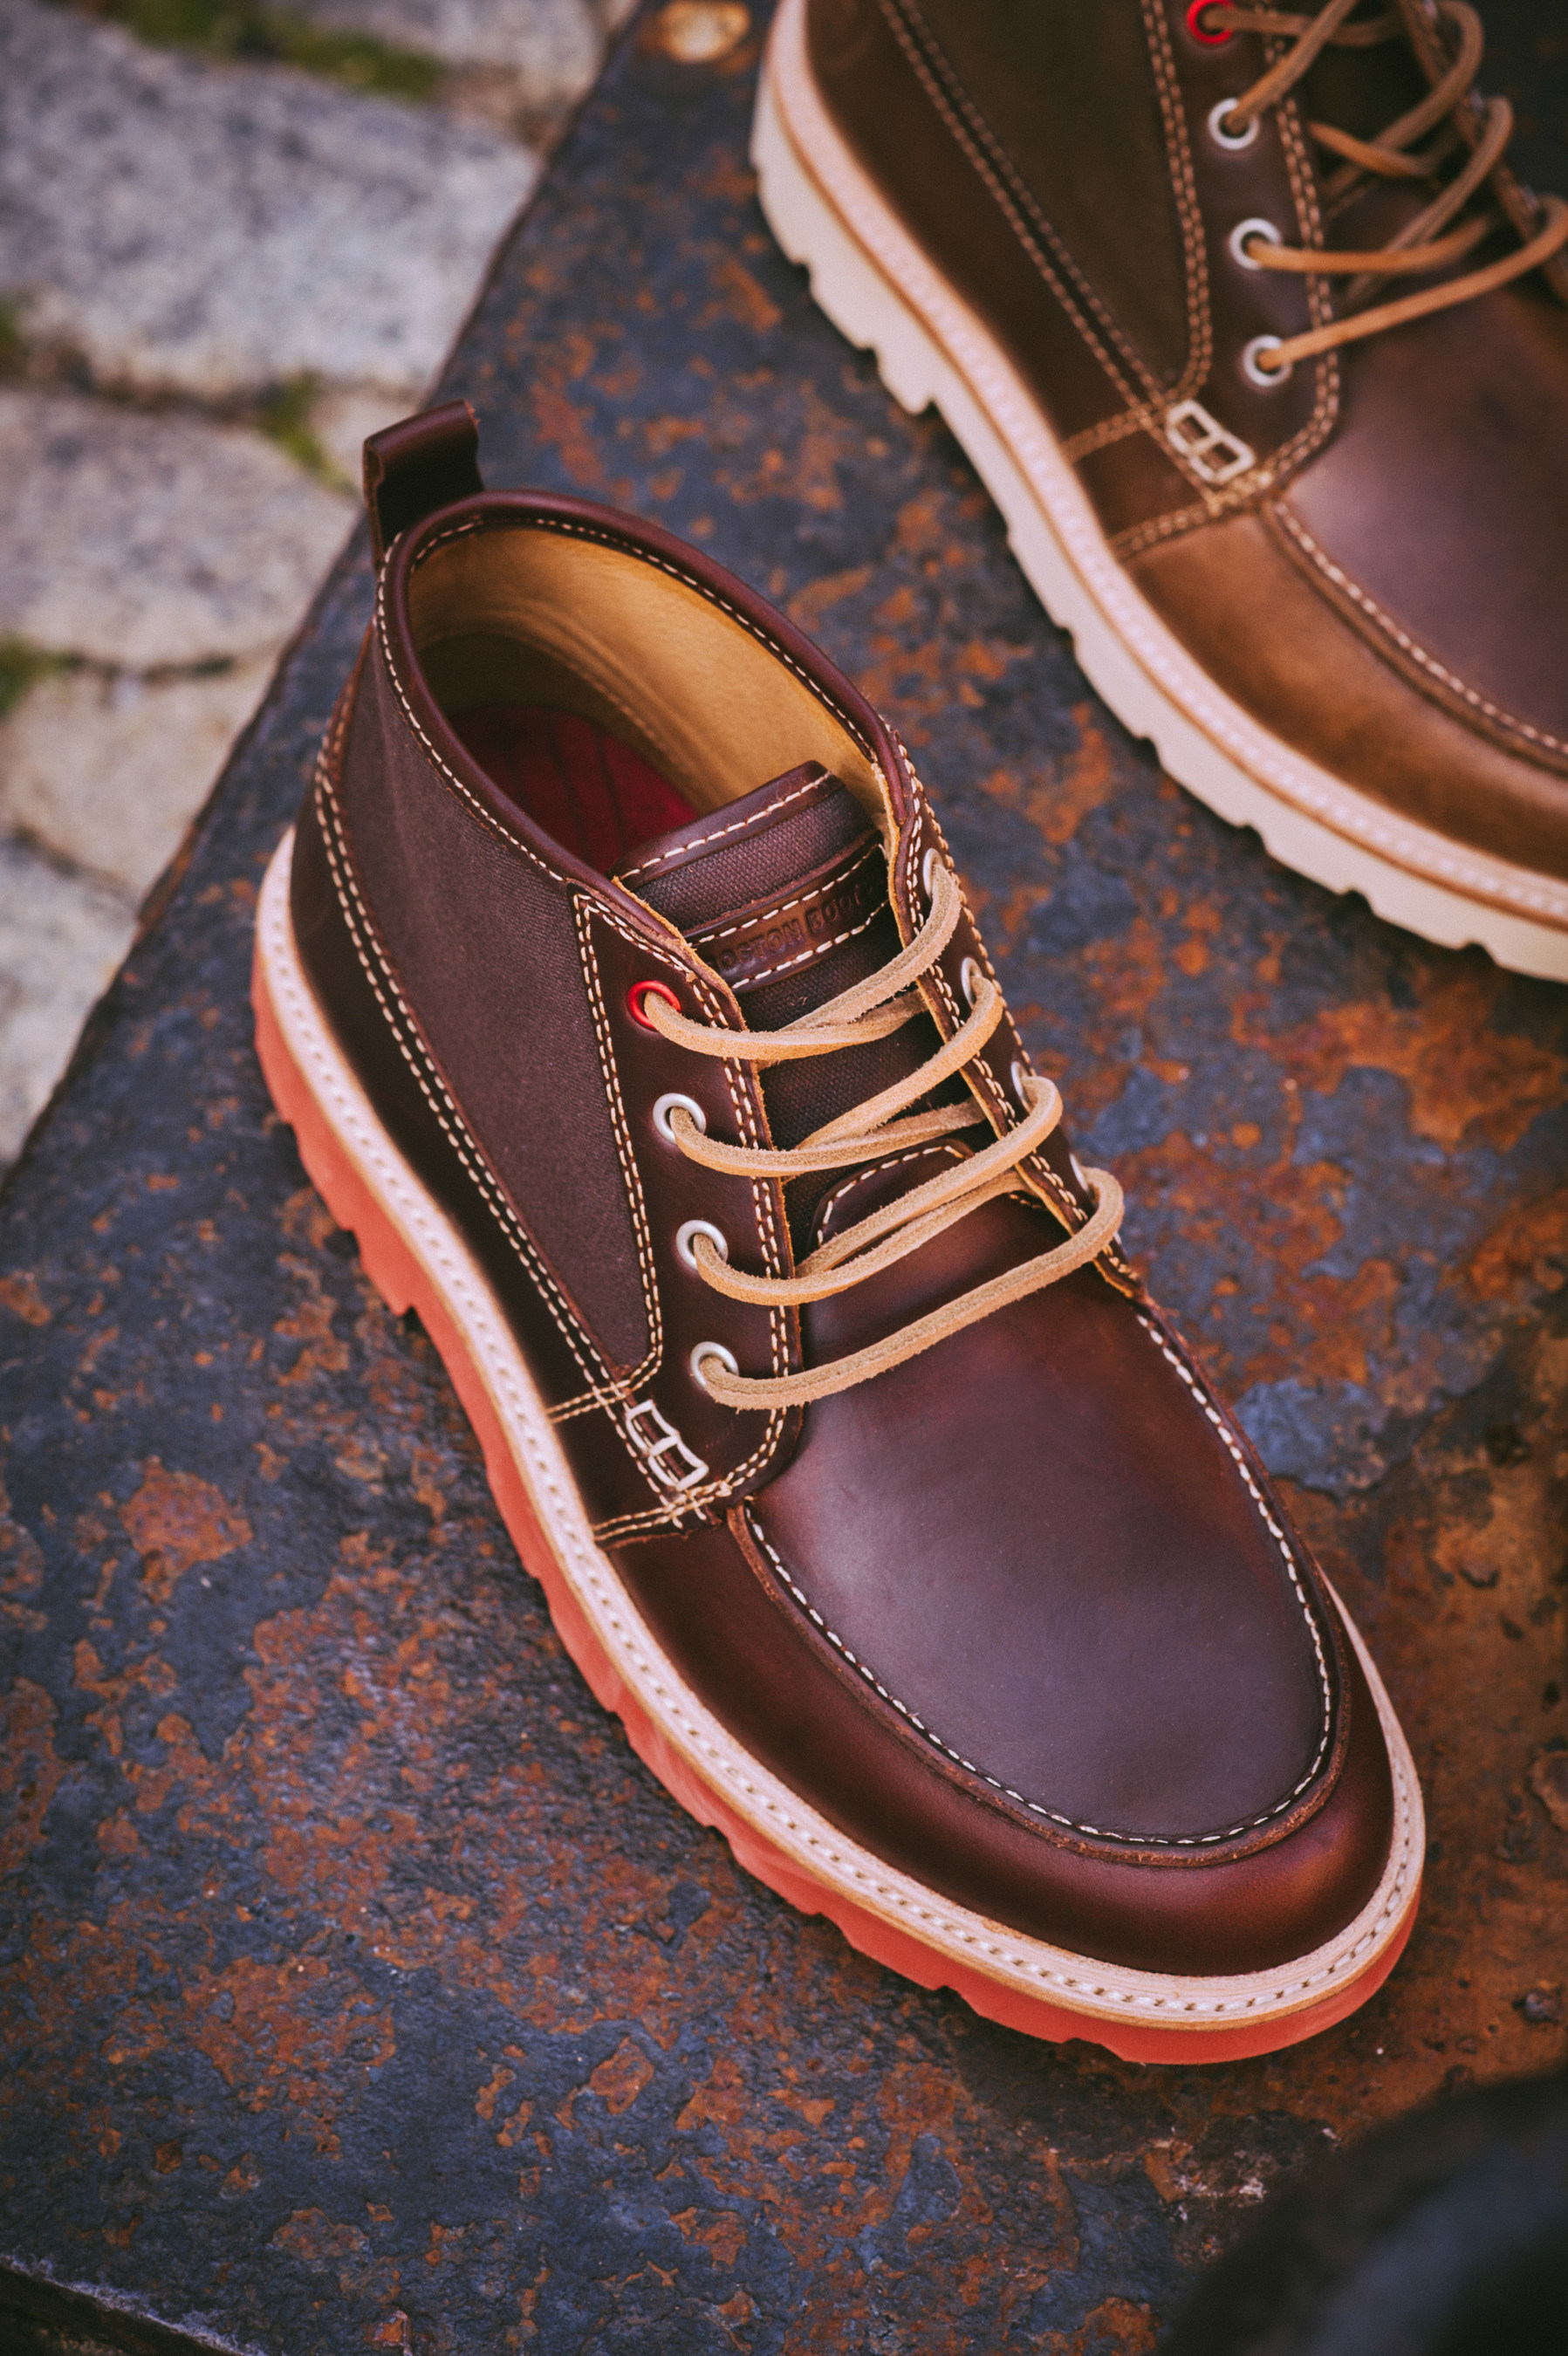 ShoeBuy expands into footwear manufacturing business with Micro Shoery Boston Boot Company. From the Boston Boot Co.'s Cambridge collection, this Chukka will take you from day hike to dive bar; this ruggedly handsome boot takes a beating, so your feet won't have to. Waterproof Horween Chromexcel leather, heavily waxed 10 oz. canvas panels, a natural leather welt and authentic rawhide laces keep you warm, dry and looking good, despite the weather's best efforts. Available at ShoeBuy.com.